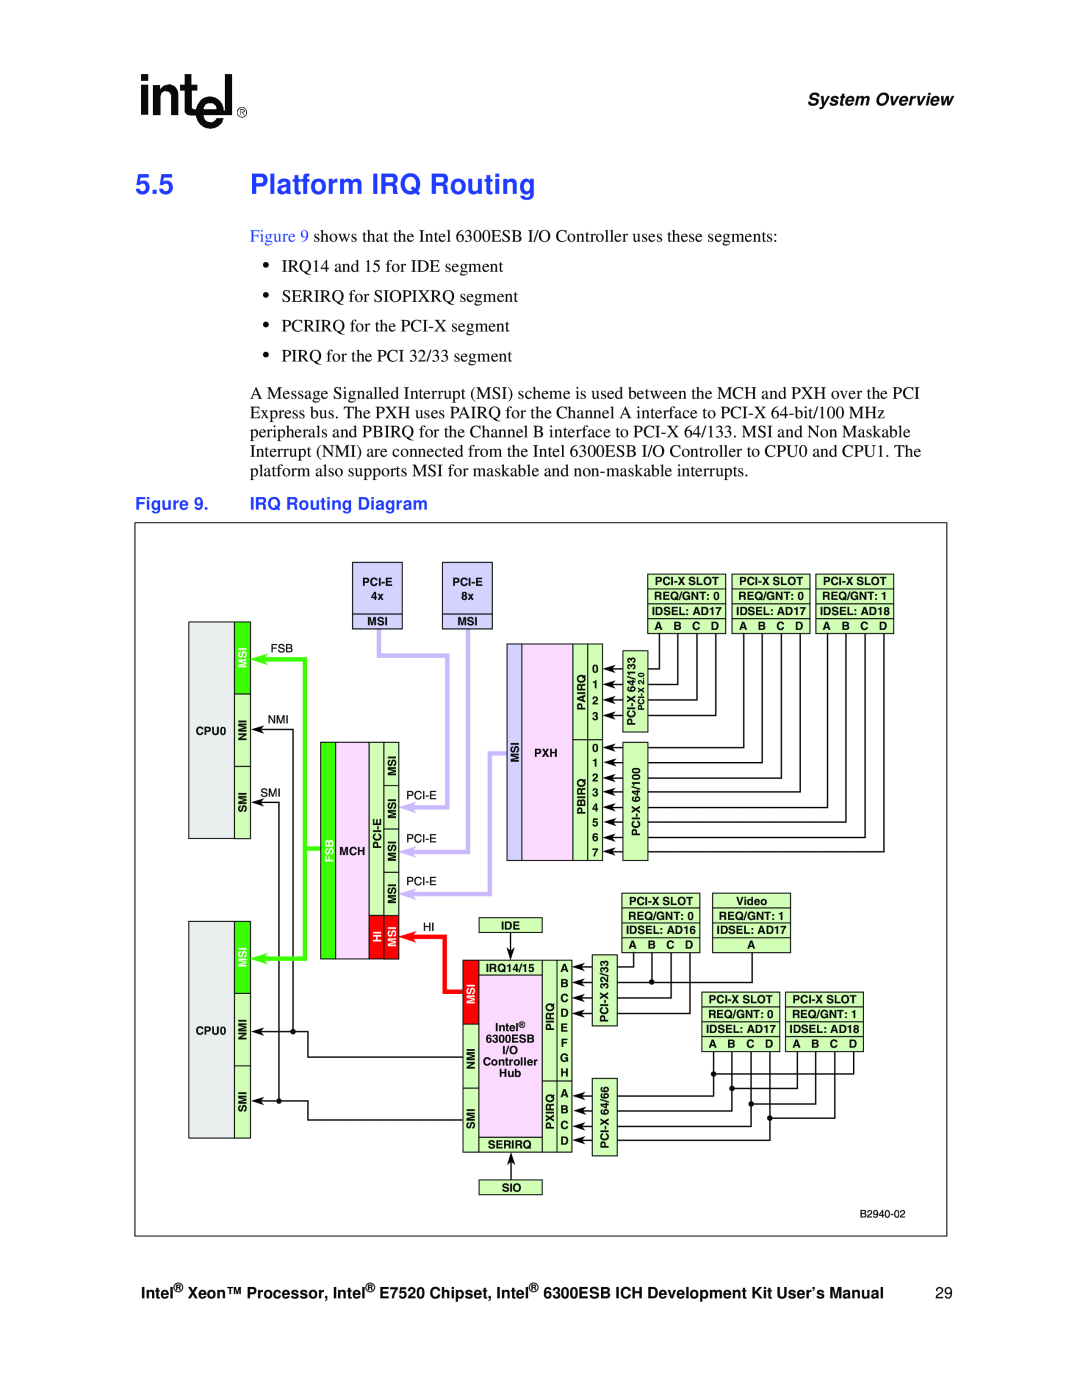 Intel 6300ESB ICH, Xeon user manual Platform IRQ Routing, IRQ Routing Diagram, System Overview 